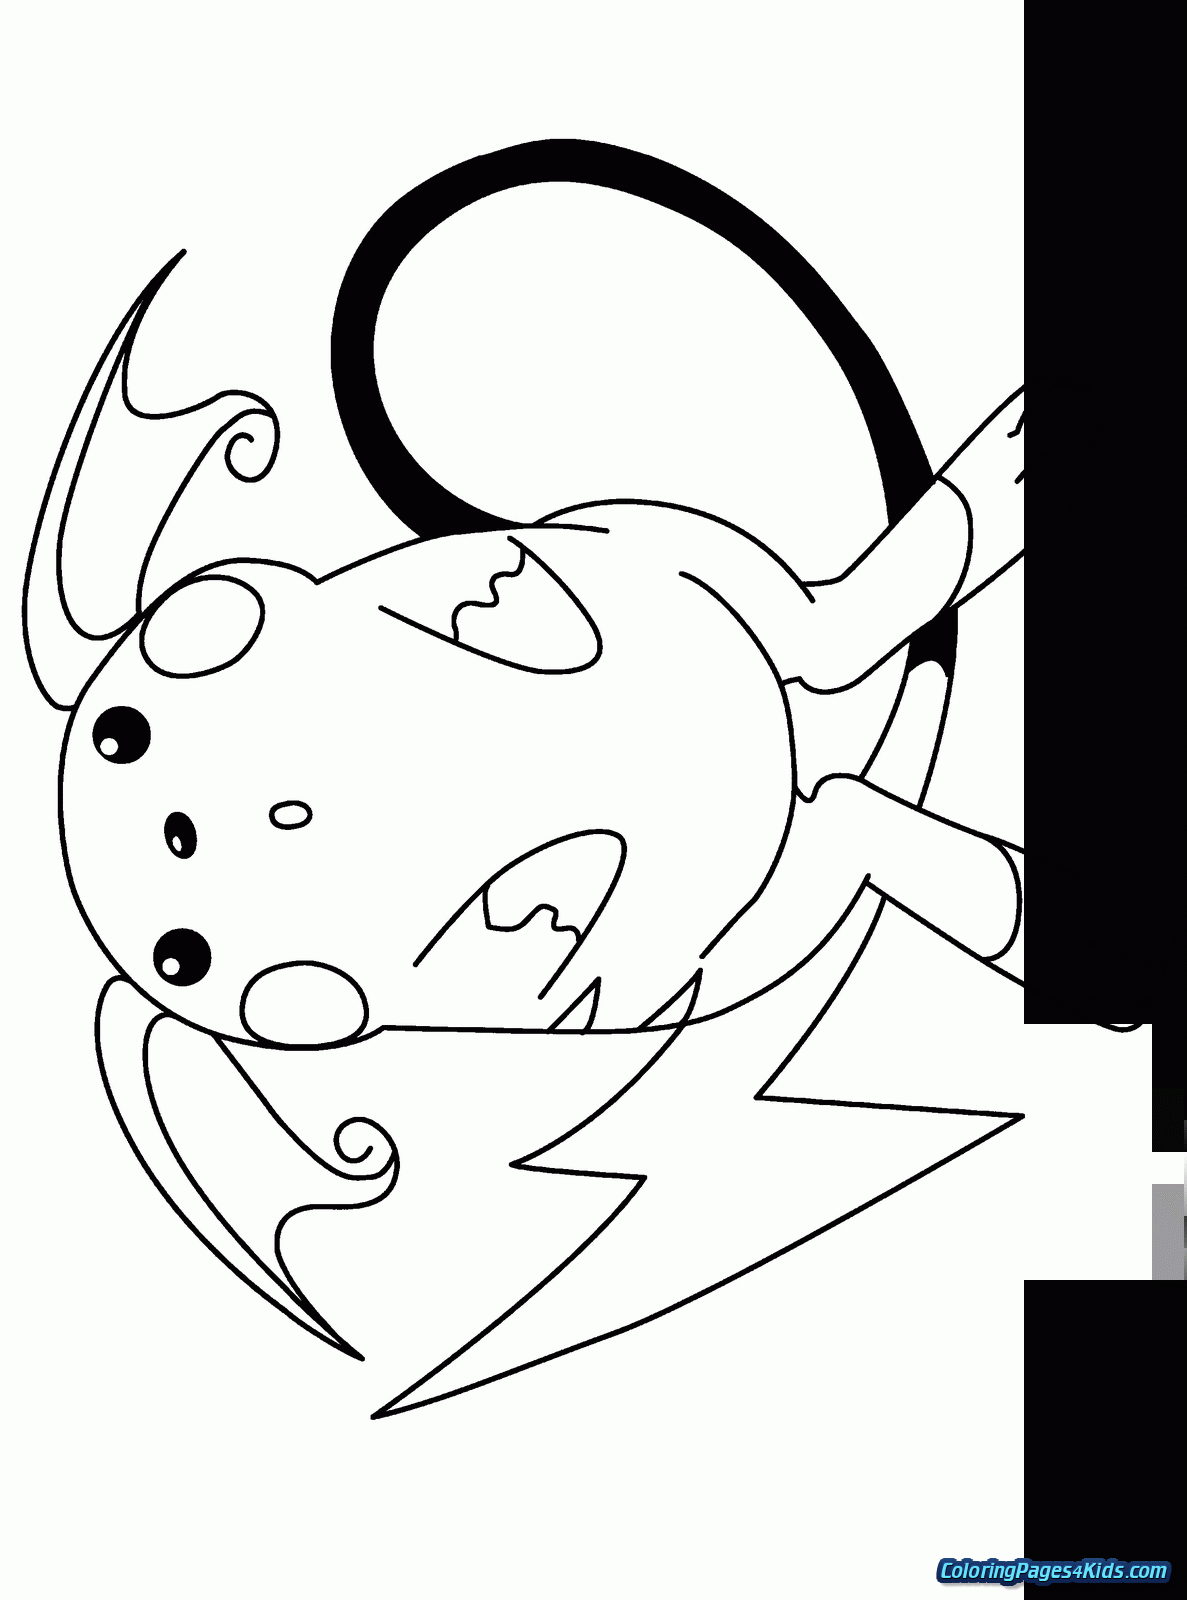 Charizard Coloring Pages Pokemon Coloring Pages Charizard Free Printable Coloring Pages